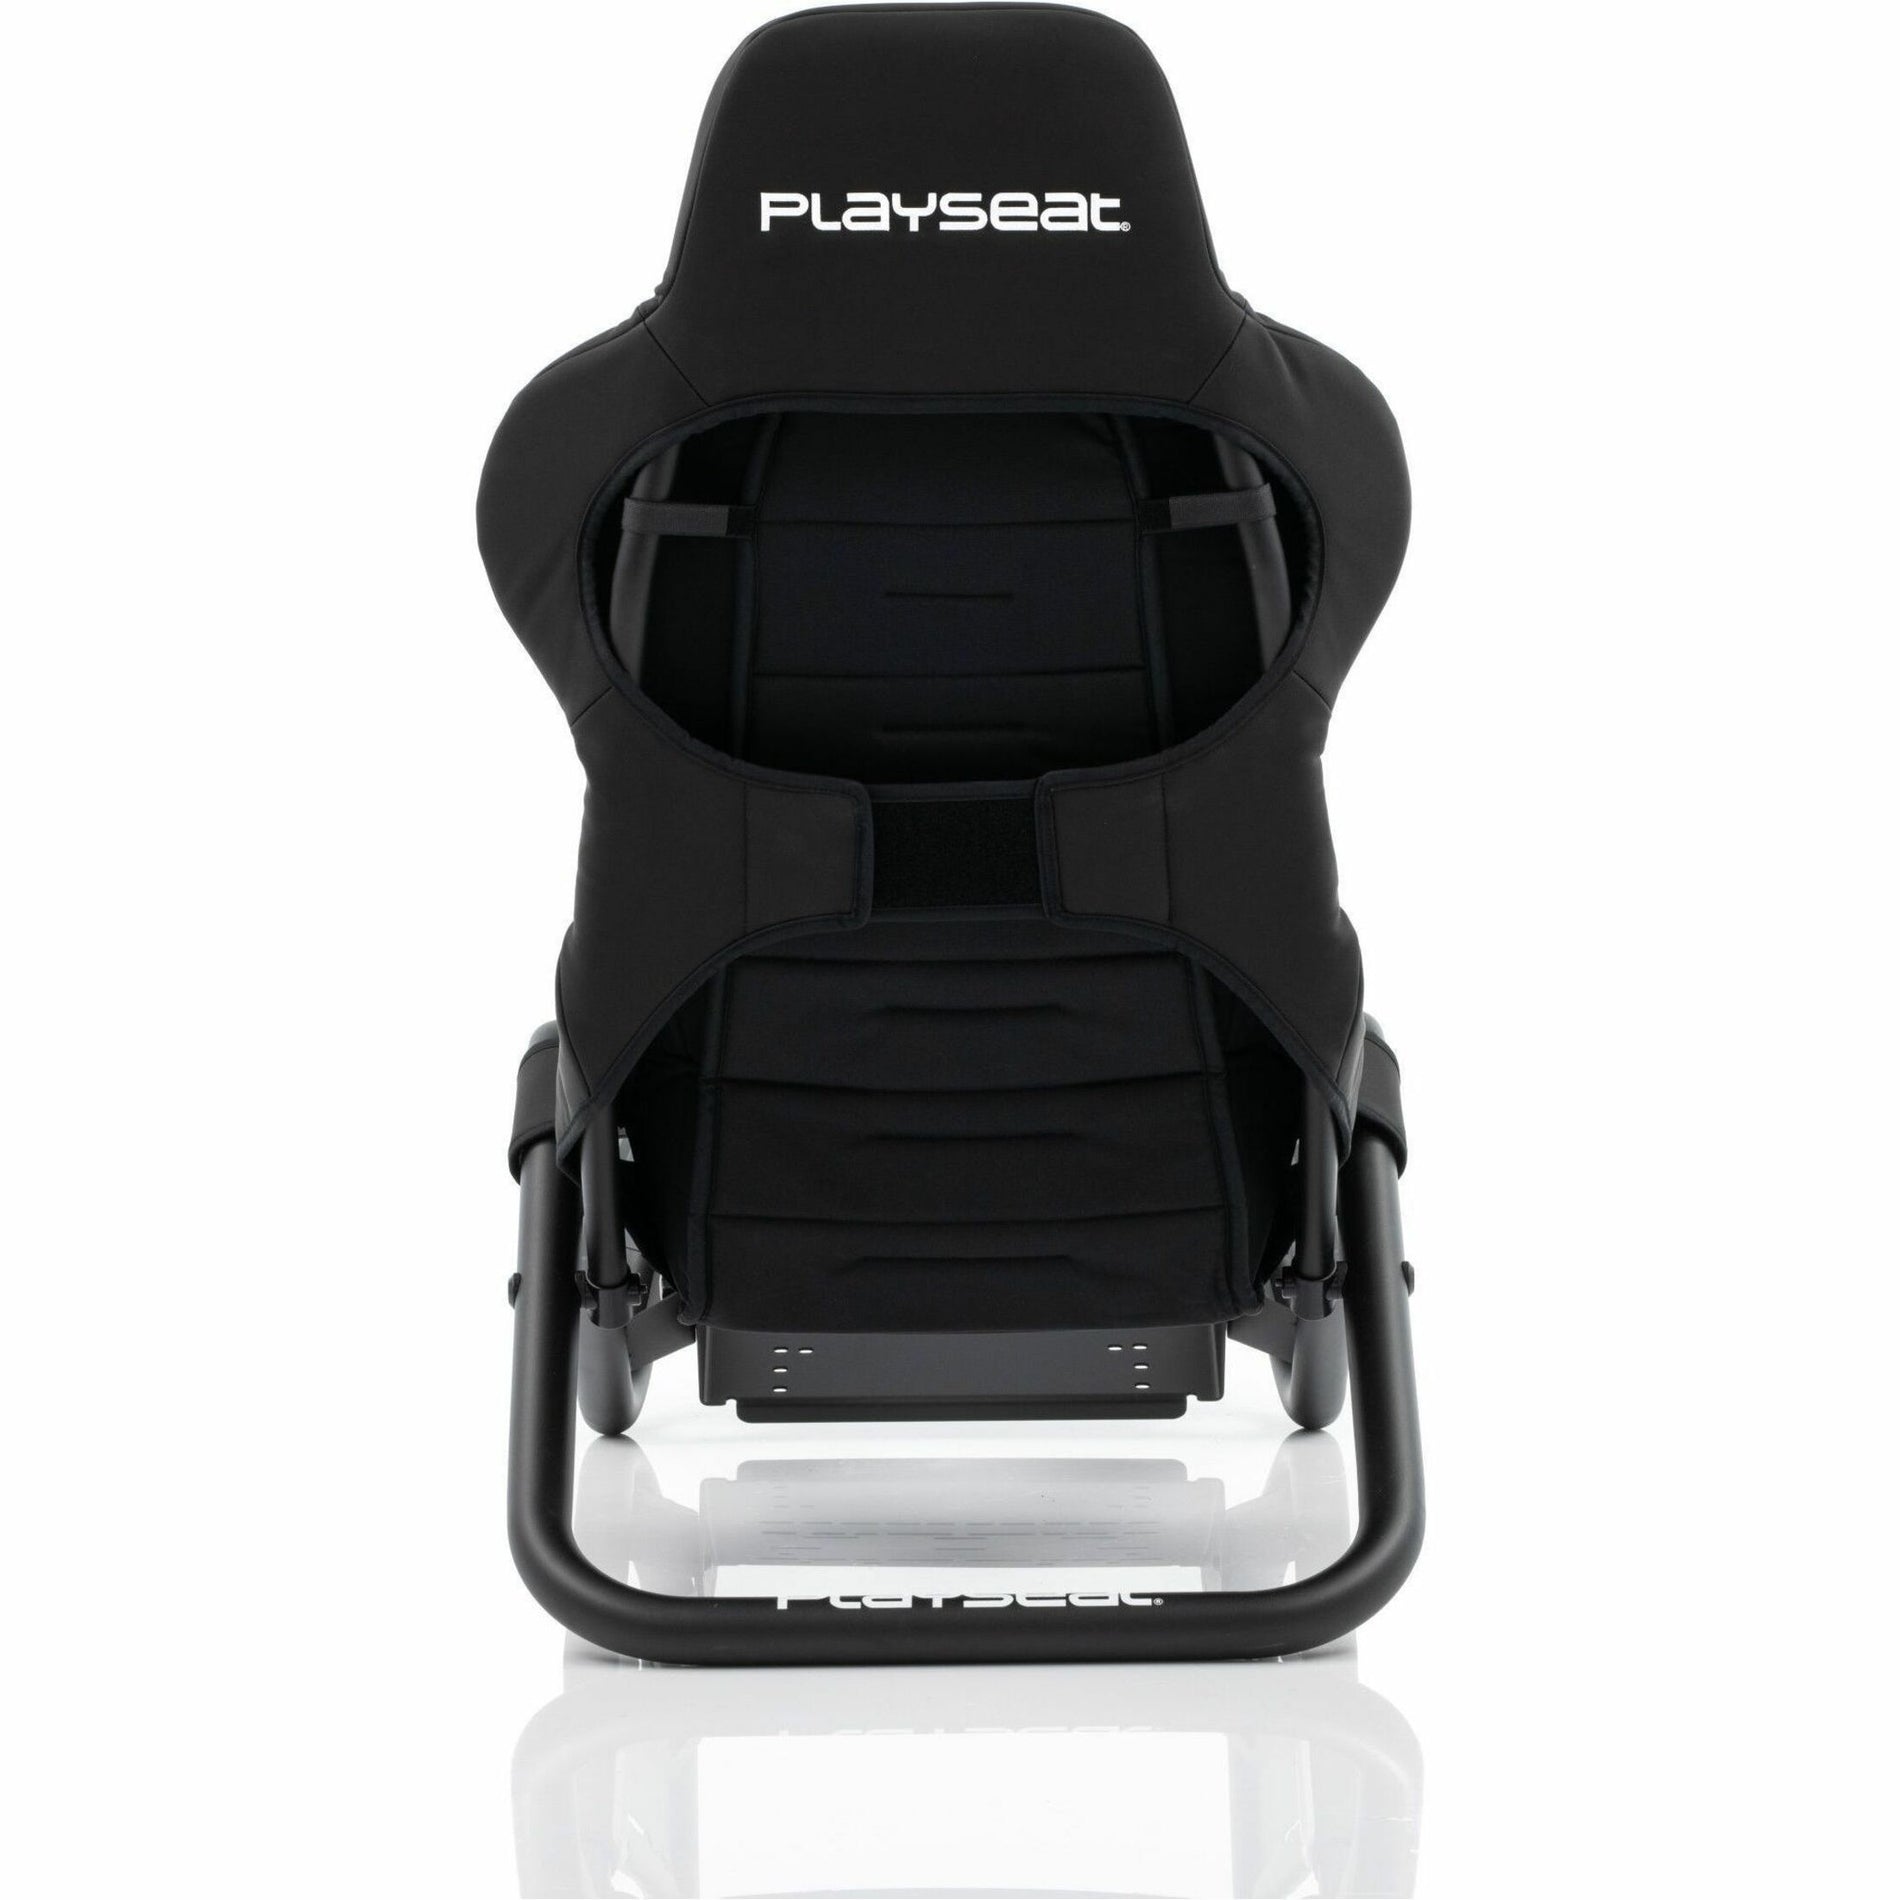 Playseats Trophy Black, Gaming Chair with Adjustable Seat Height